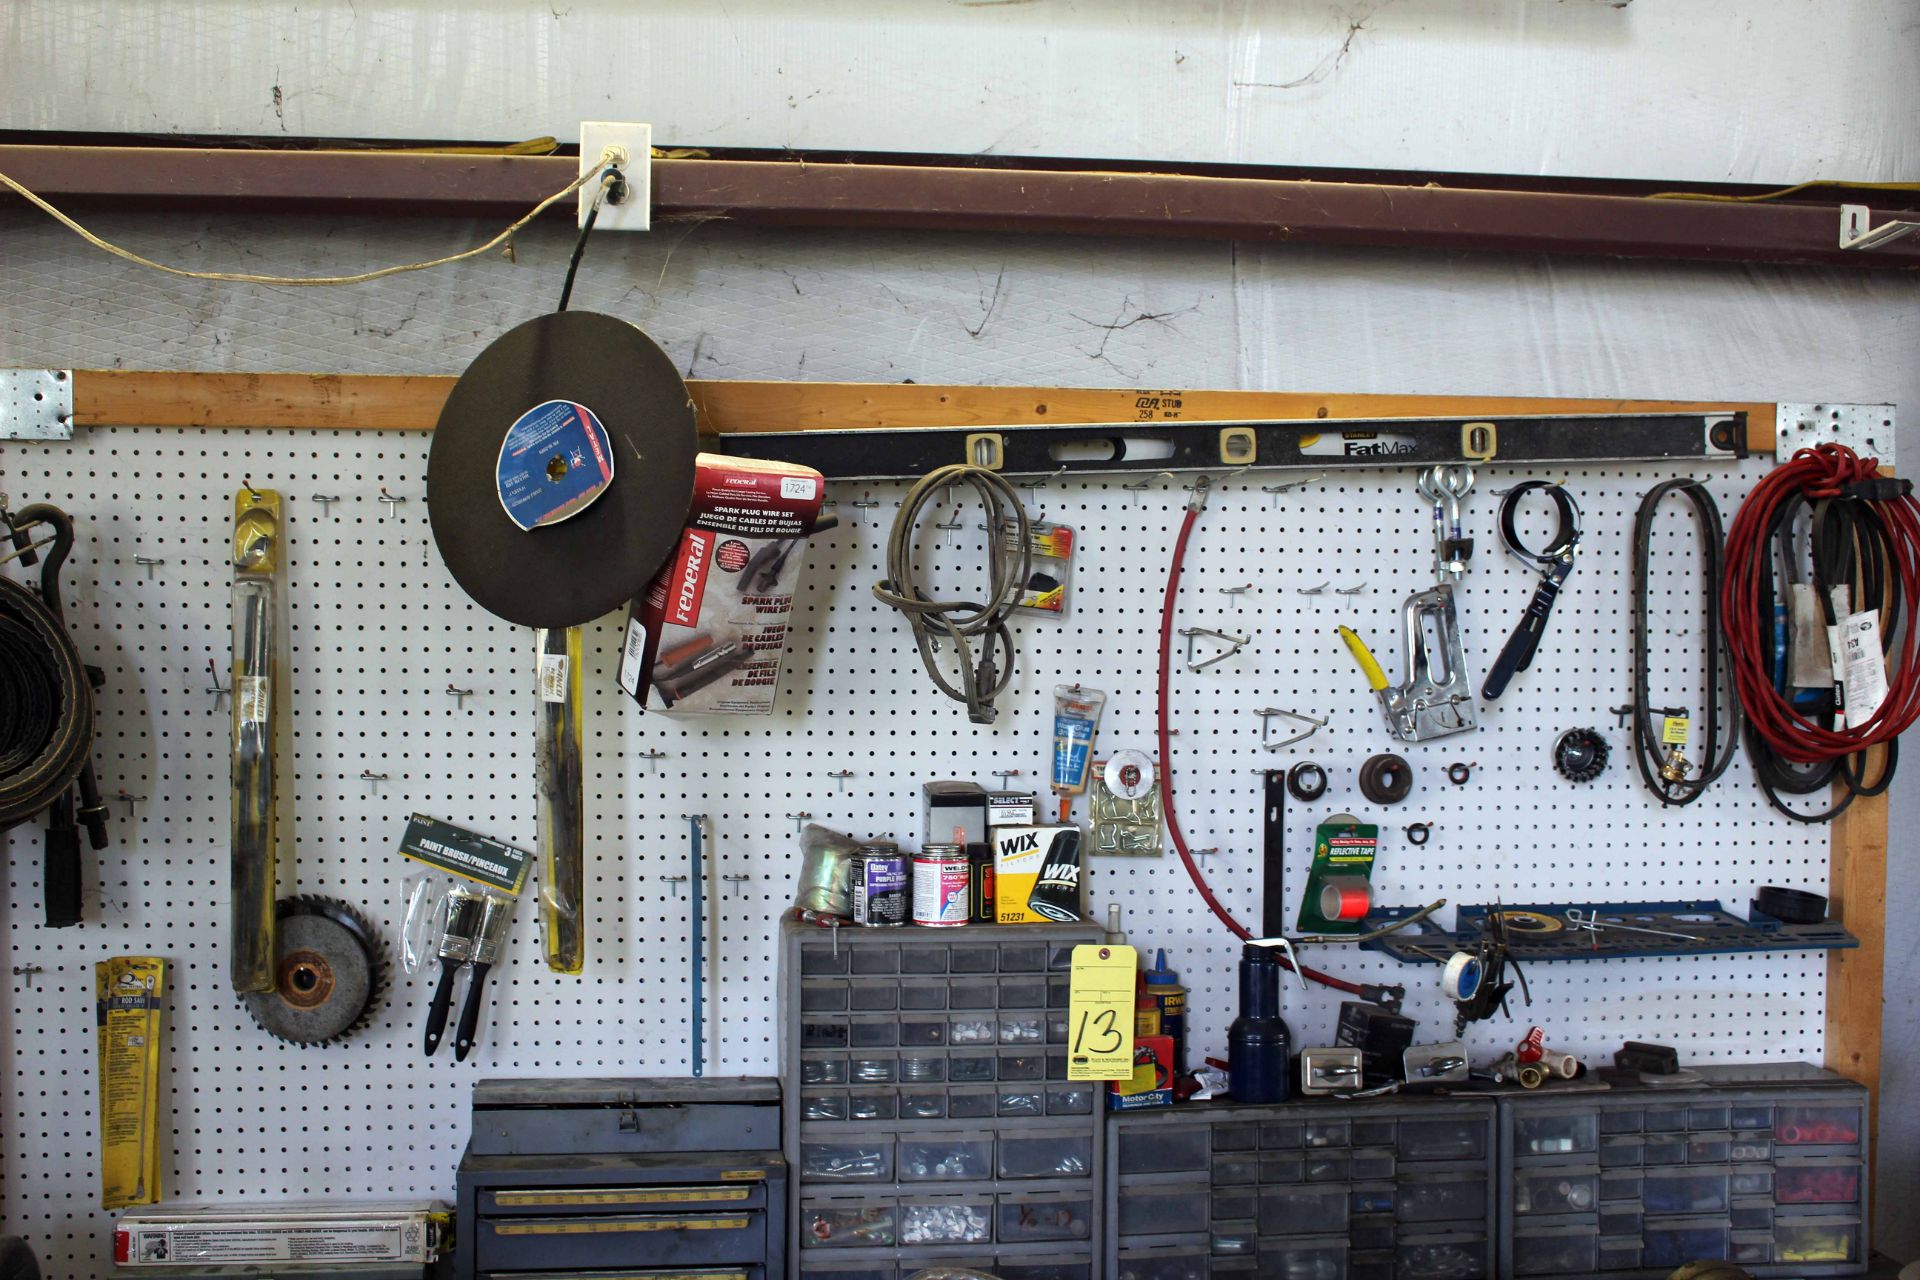 LOT OF TOOLS, misc. (on tool bench)